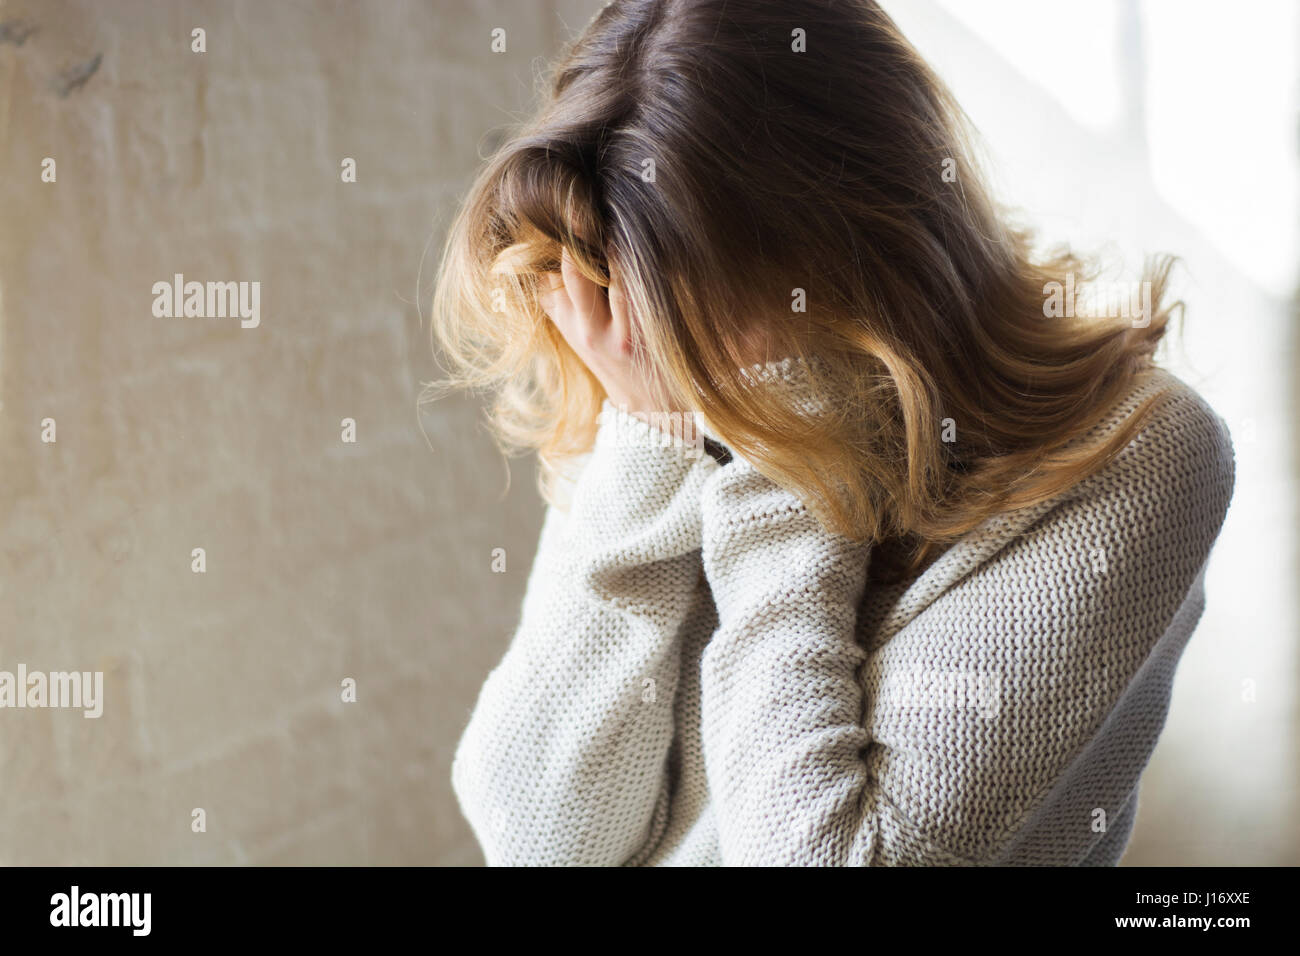 Young blond woman crying hiding face in hands Stock Photo